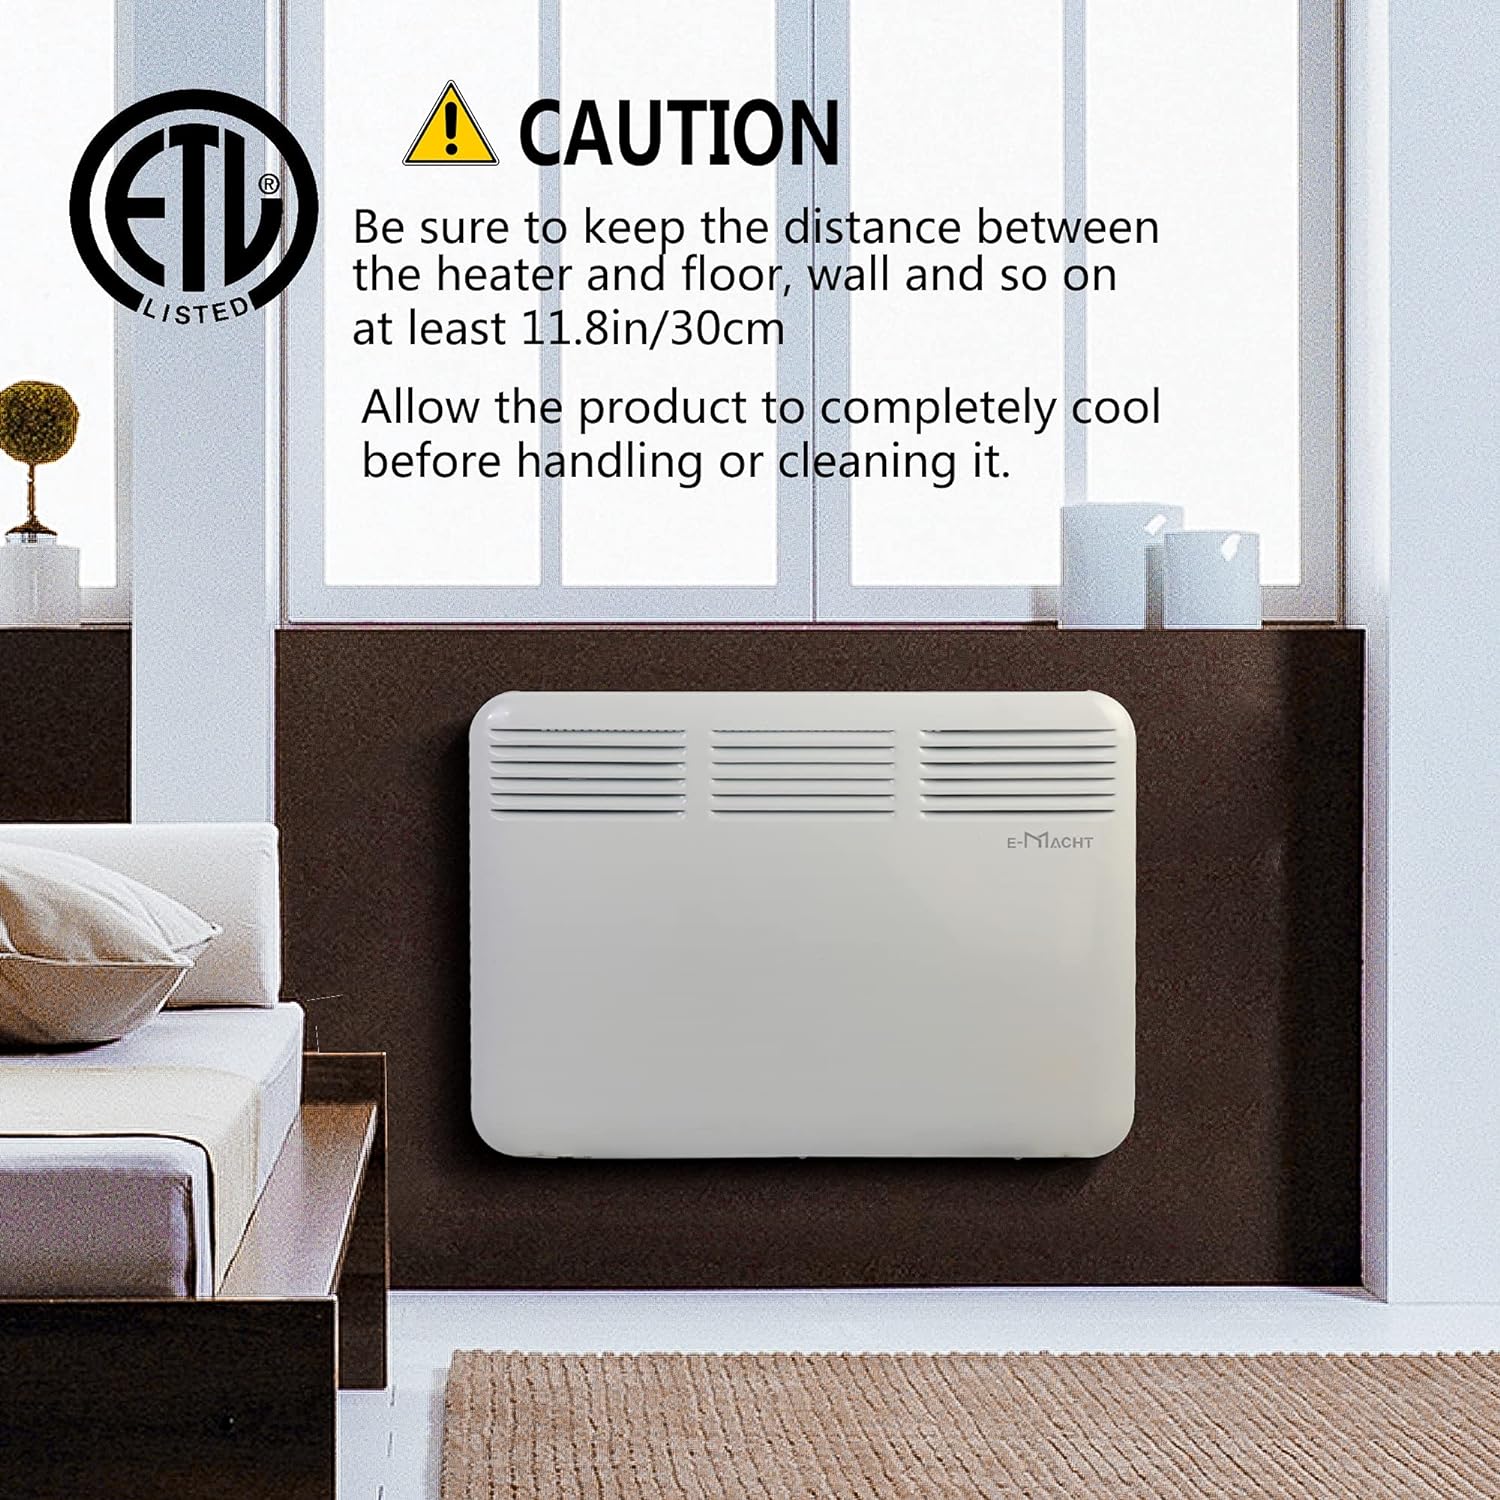 E-Macht 1000W Electric Convector Heater with Wheels Freestanding/Wall Mounted Smart Space Heater Panel